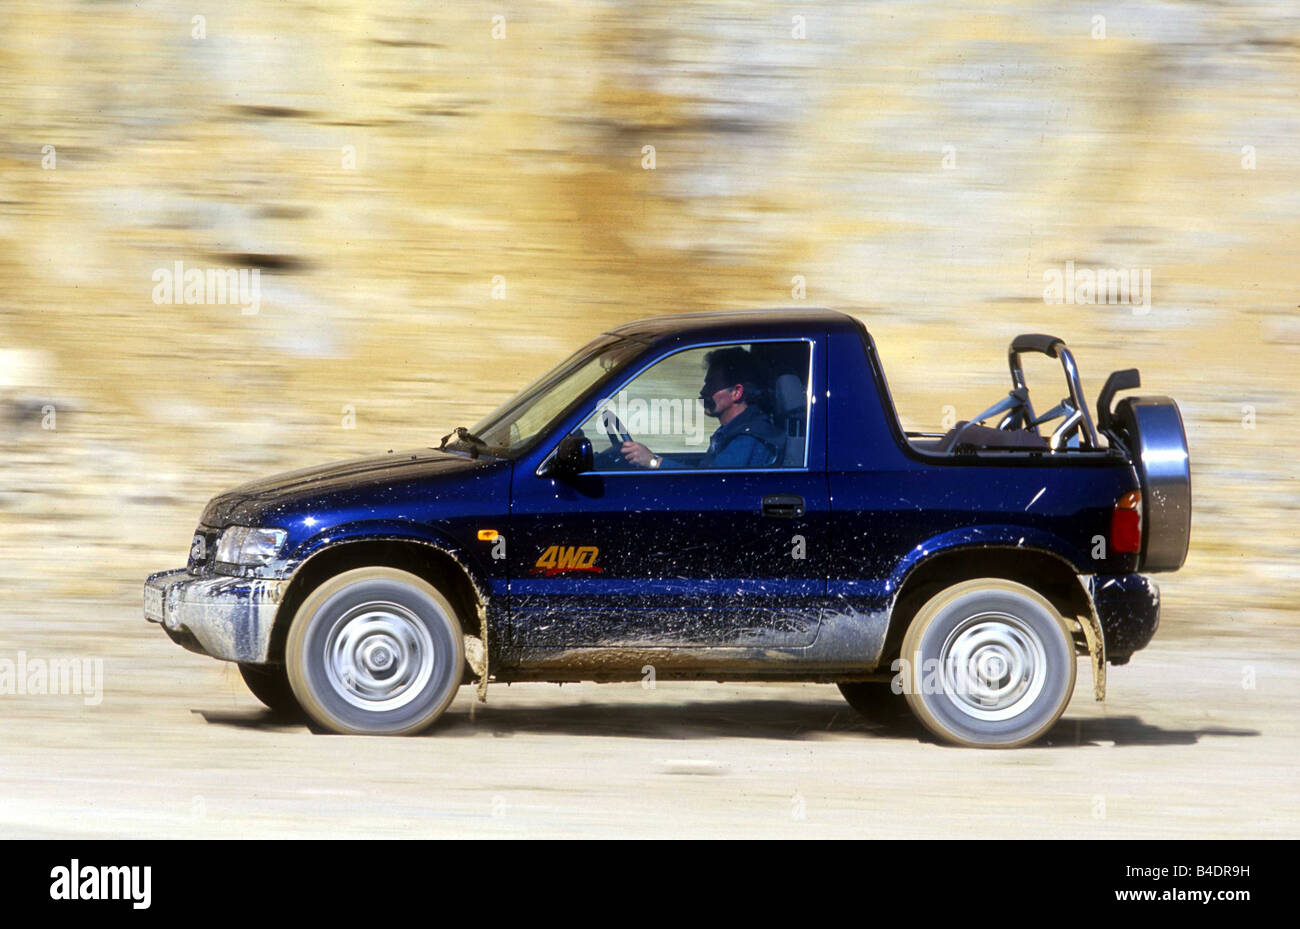 Car, KIA Sportage, cross country vehicle, model year 2000-, blue, side  view, driving, offroad Stock Photo - Alamy